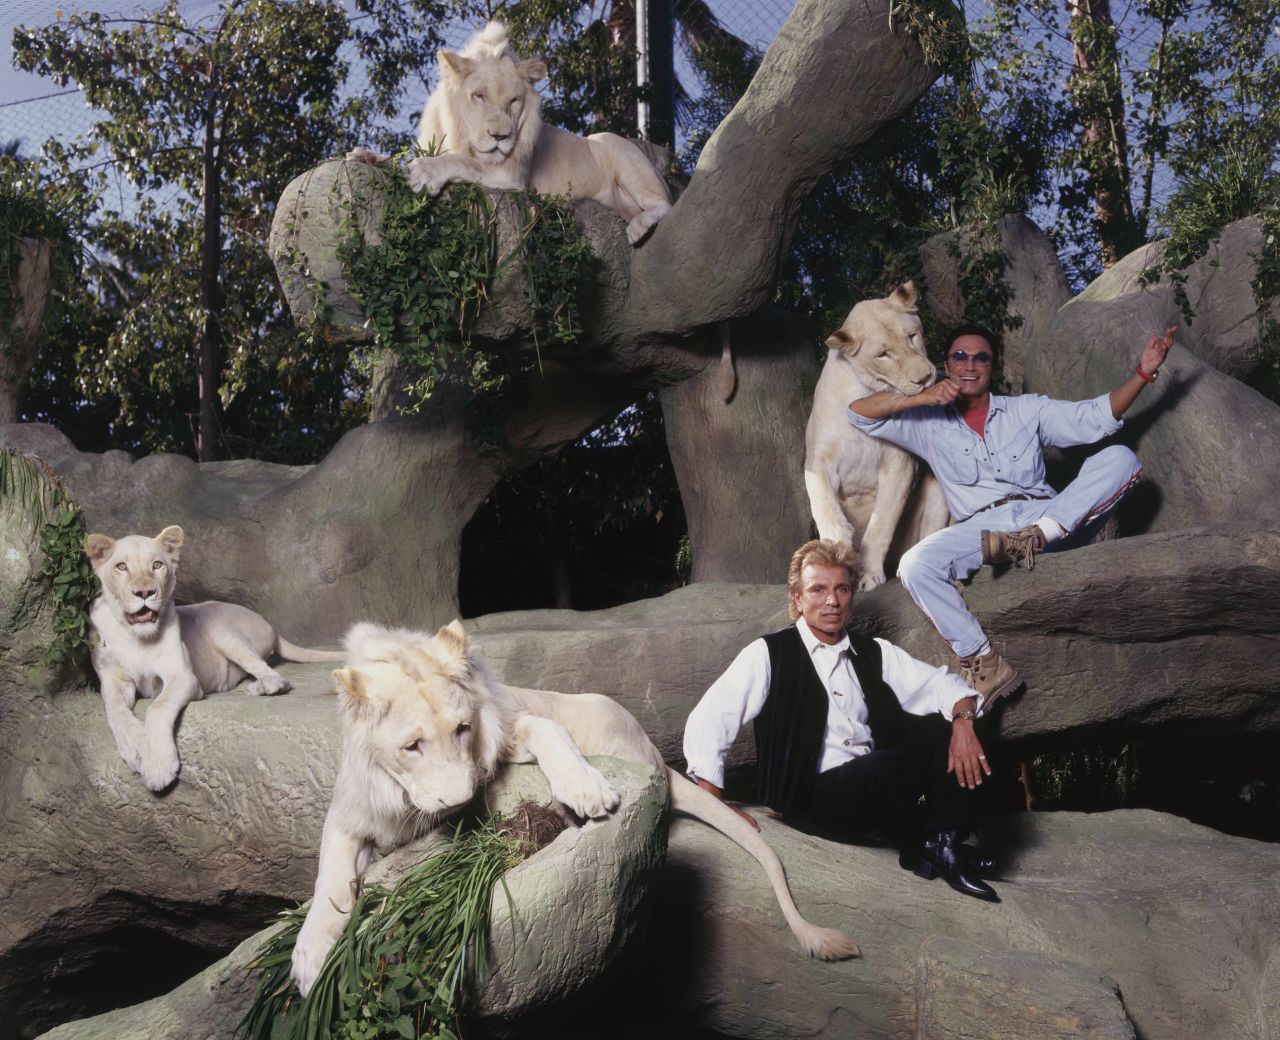 Fischbacher and Horn pose with lions in 1997.